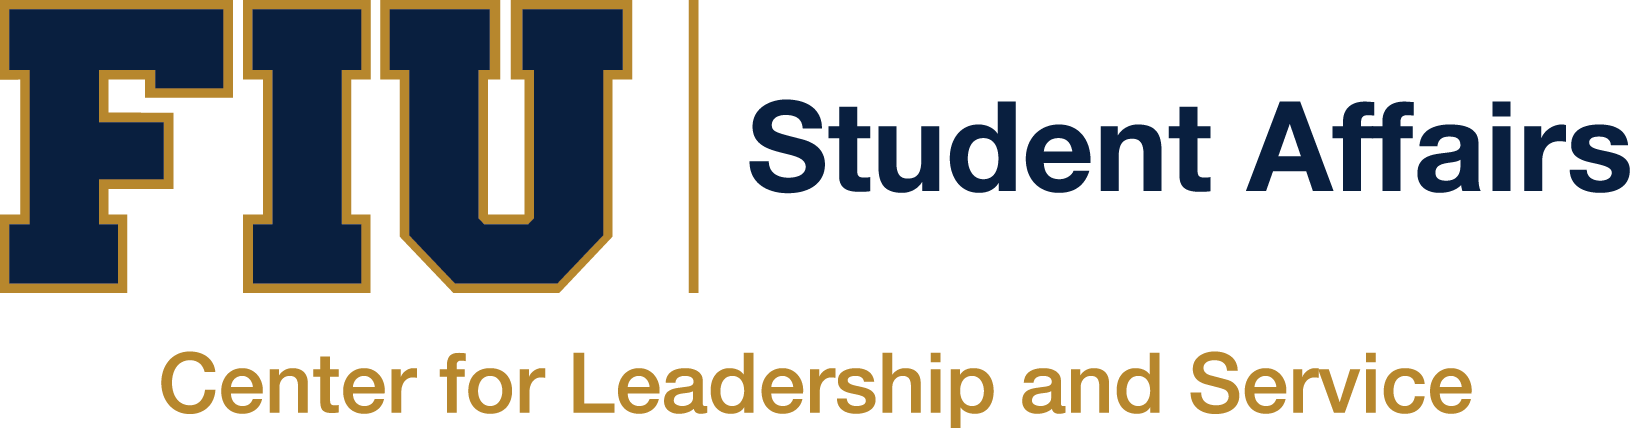 The Mission Of The Center For Leadership And Service - Fiu Center For Leadership And Service (1630x428)